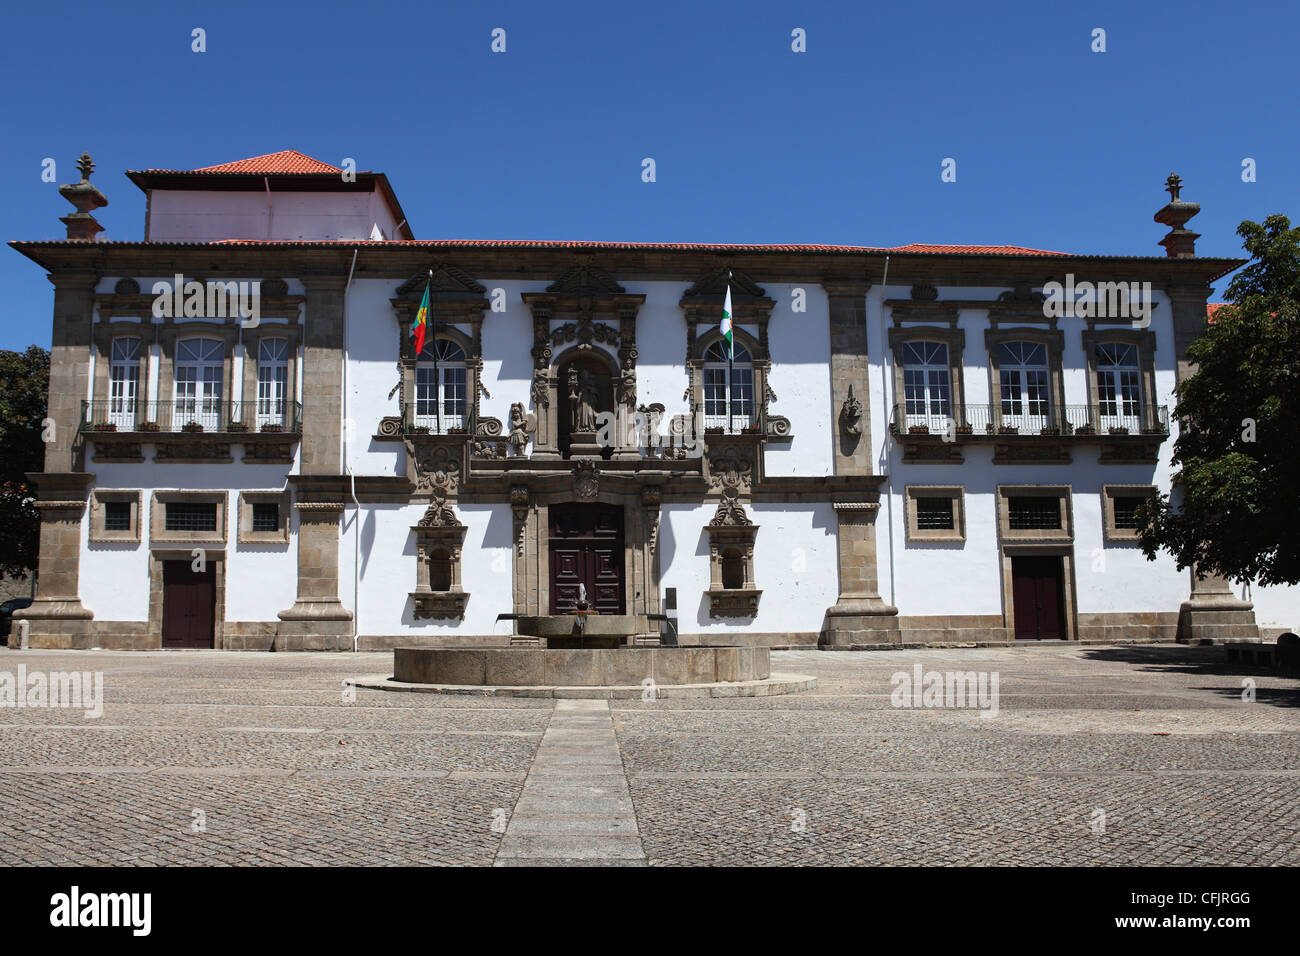 The town hall and former Convent of Santa Clara, Old Town, UNESCO World Heritage Site, Guimaraes, Minho, Portugal, Europe Stock Photo